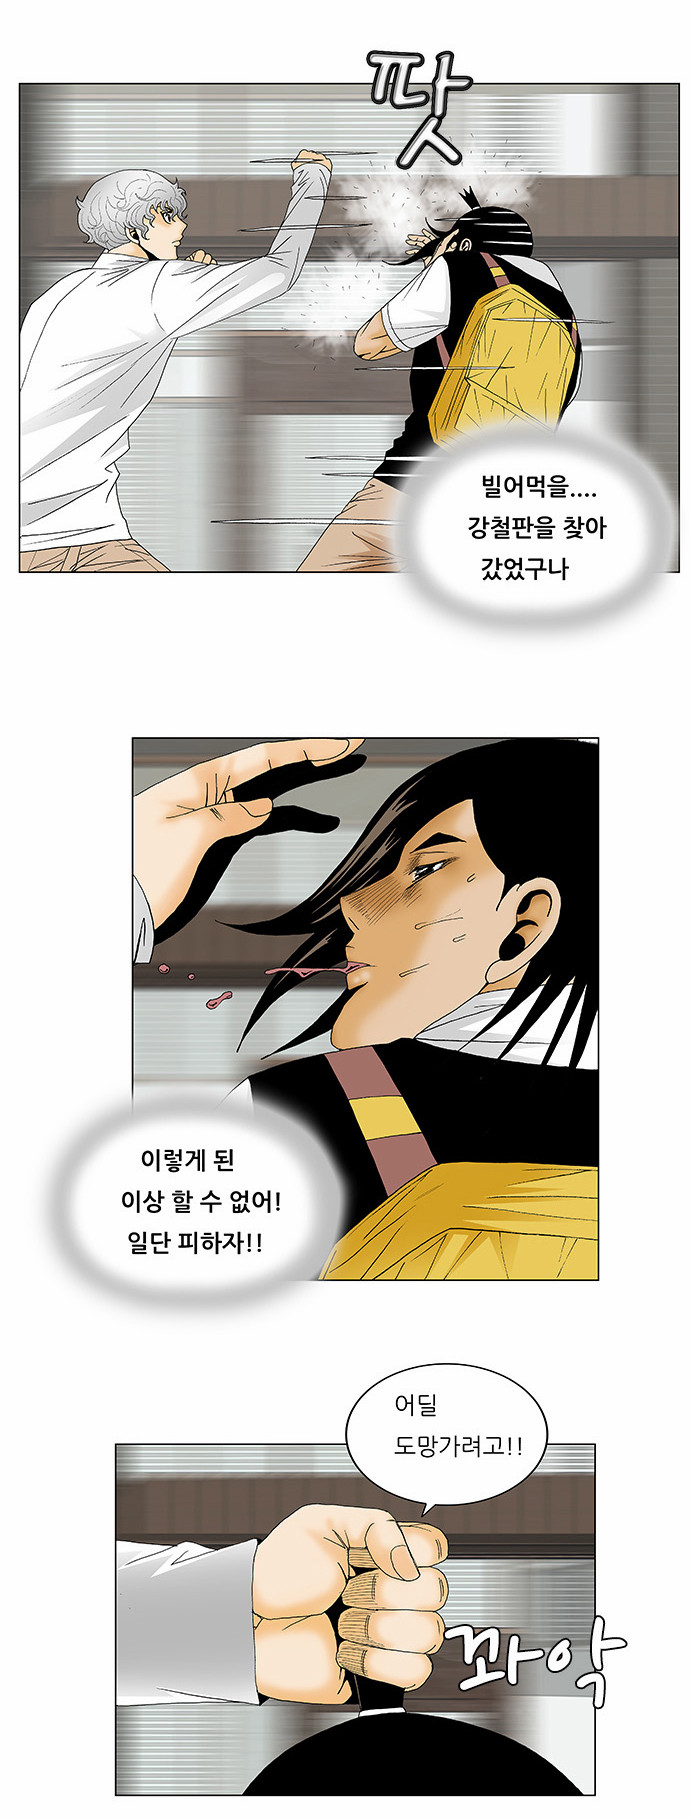 Ultimate Legend - Kang Hae Hyo - Chapter 127 - Page 25